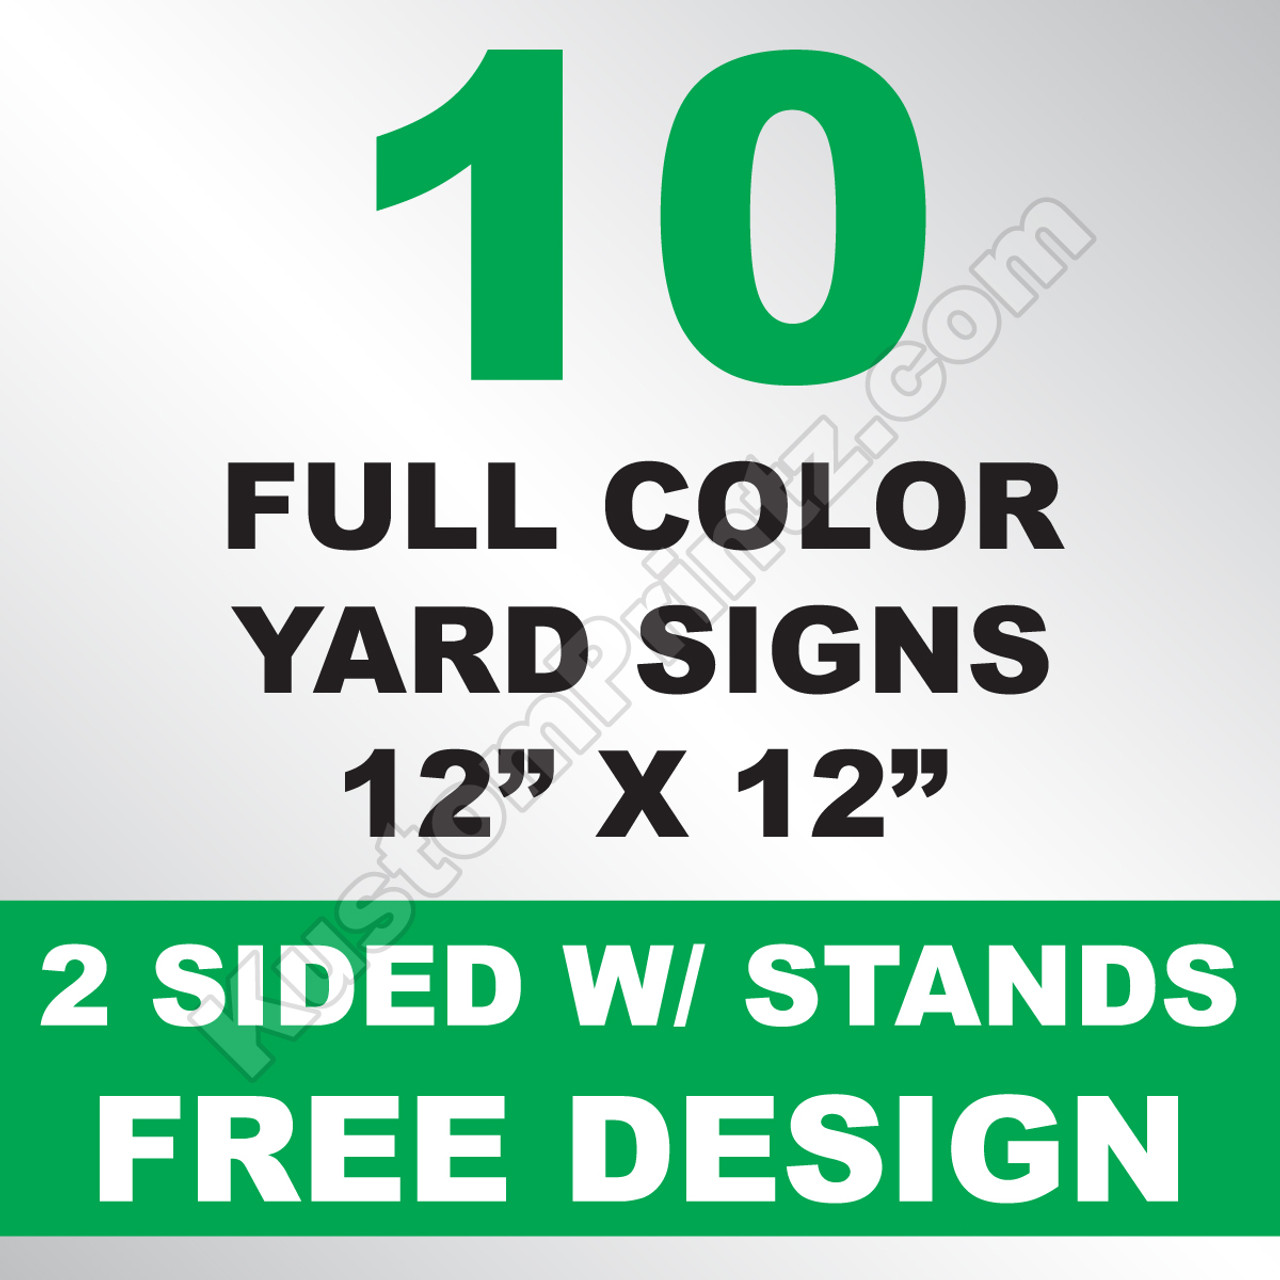 10 Yard Signs 2 Sided w/ Stands 12x12